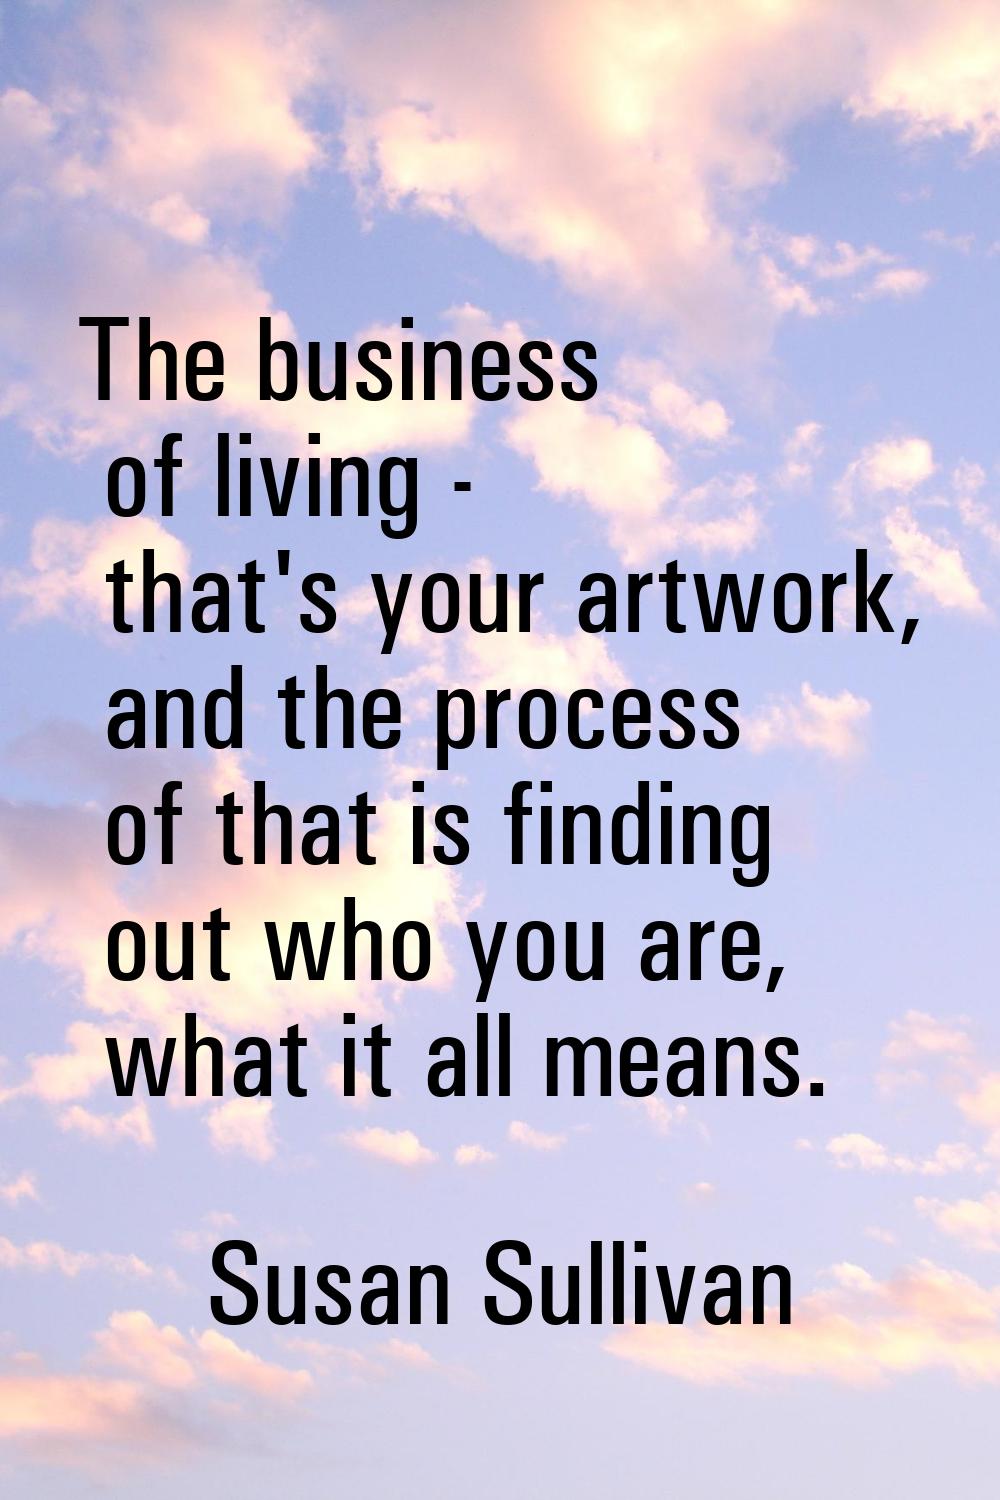 The business of living - that's your artwork, and the process of that is finding out who you are, w